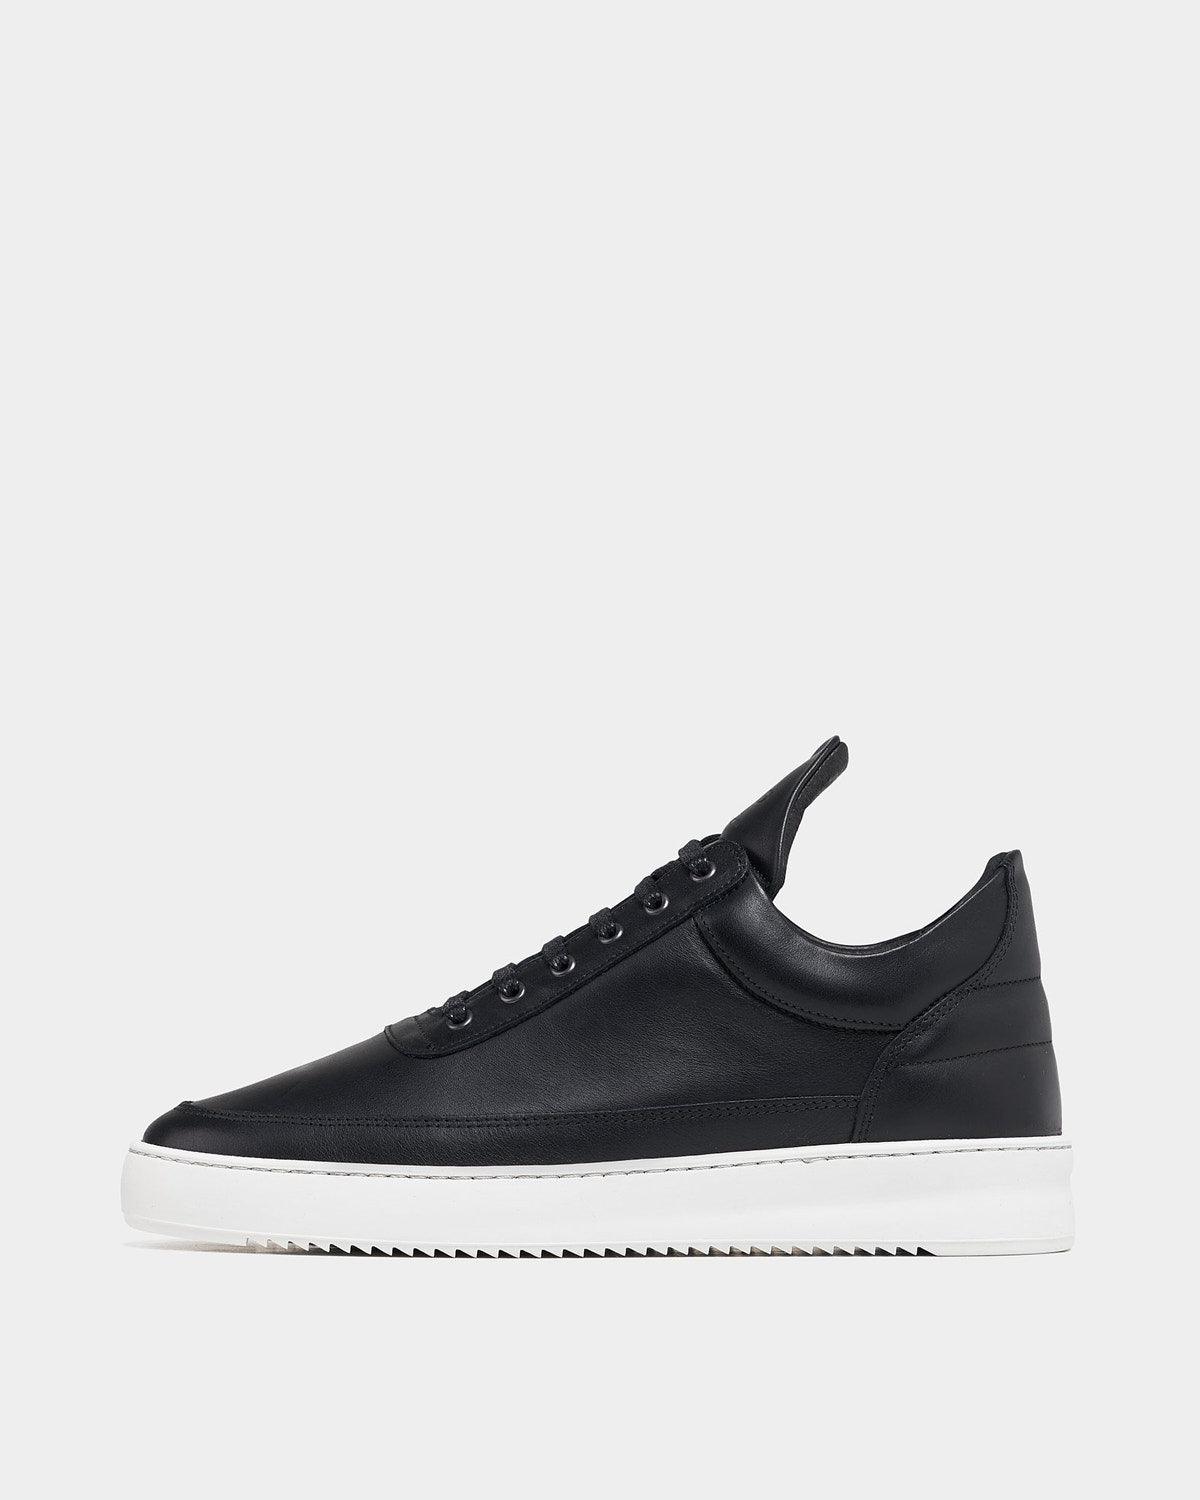 Low Top Ripple Nappa Black - Filling Pieces